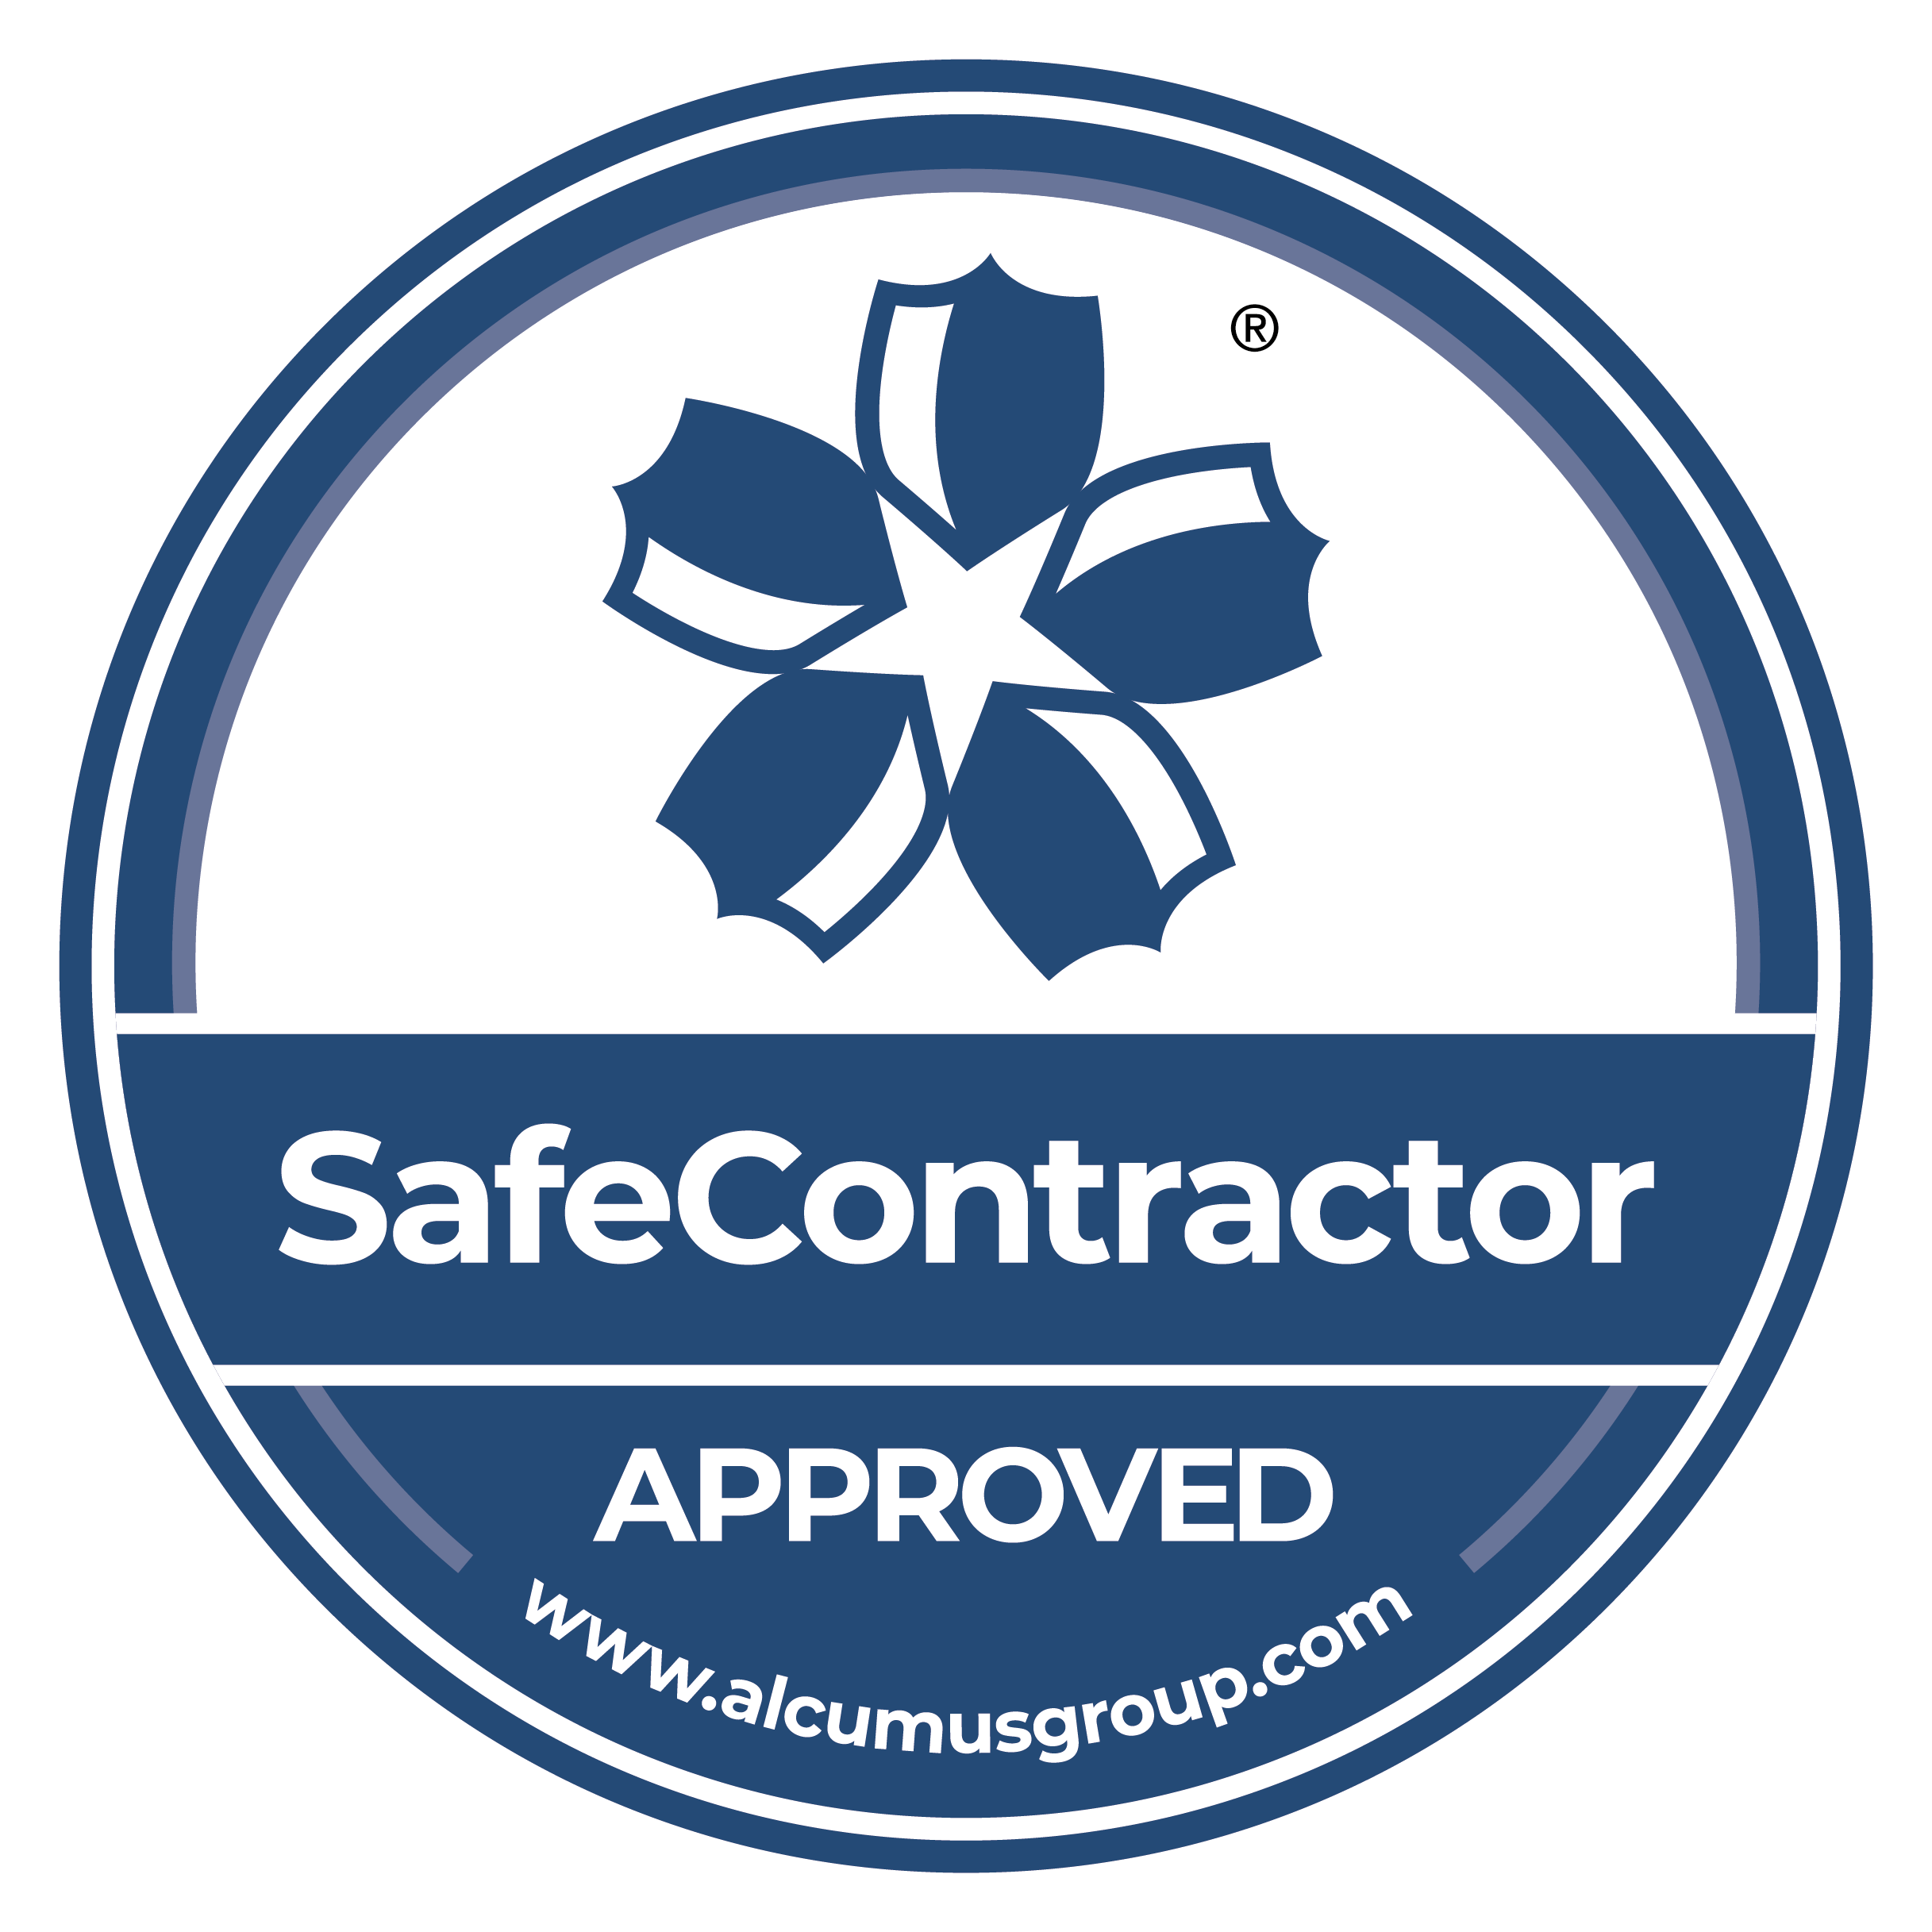 SafeContractor Approved Blocked drains to septic tanks & everything drainage in between ASL Limited Guildford Surrey